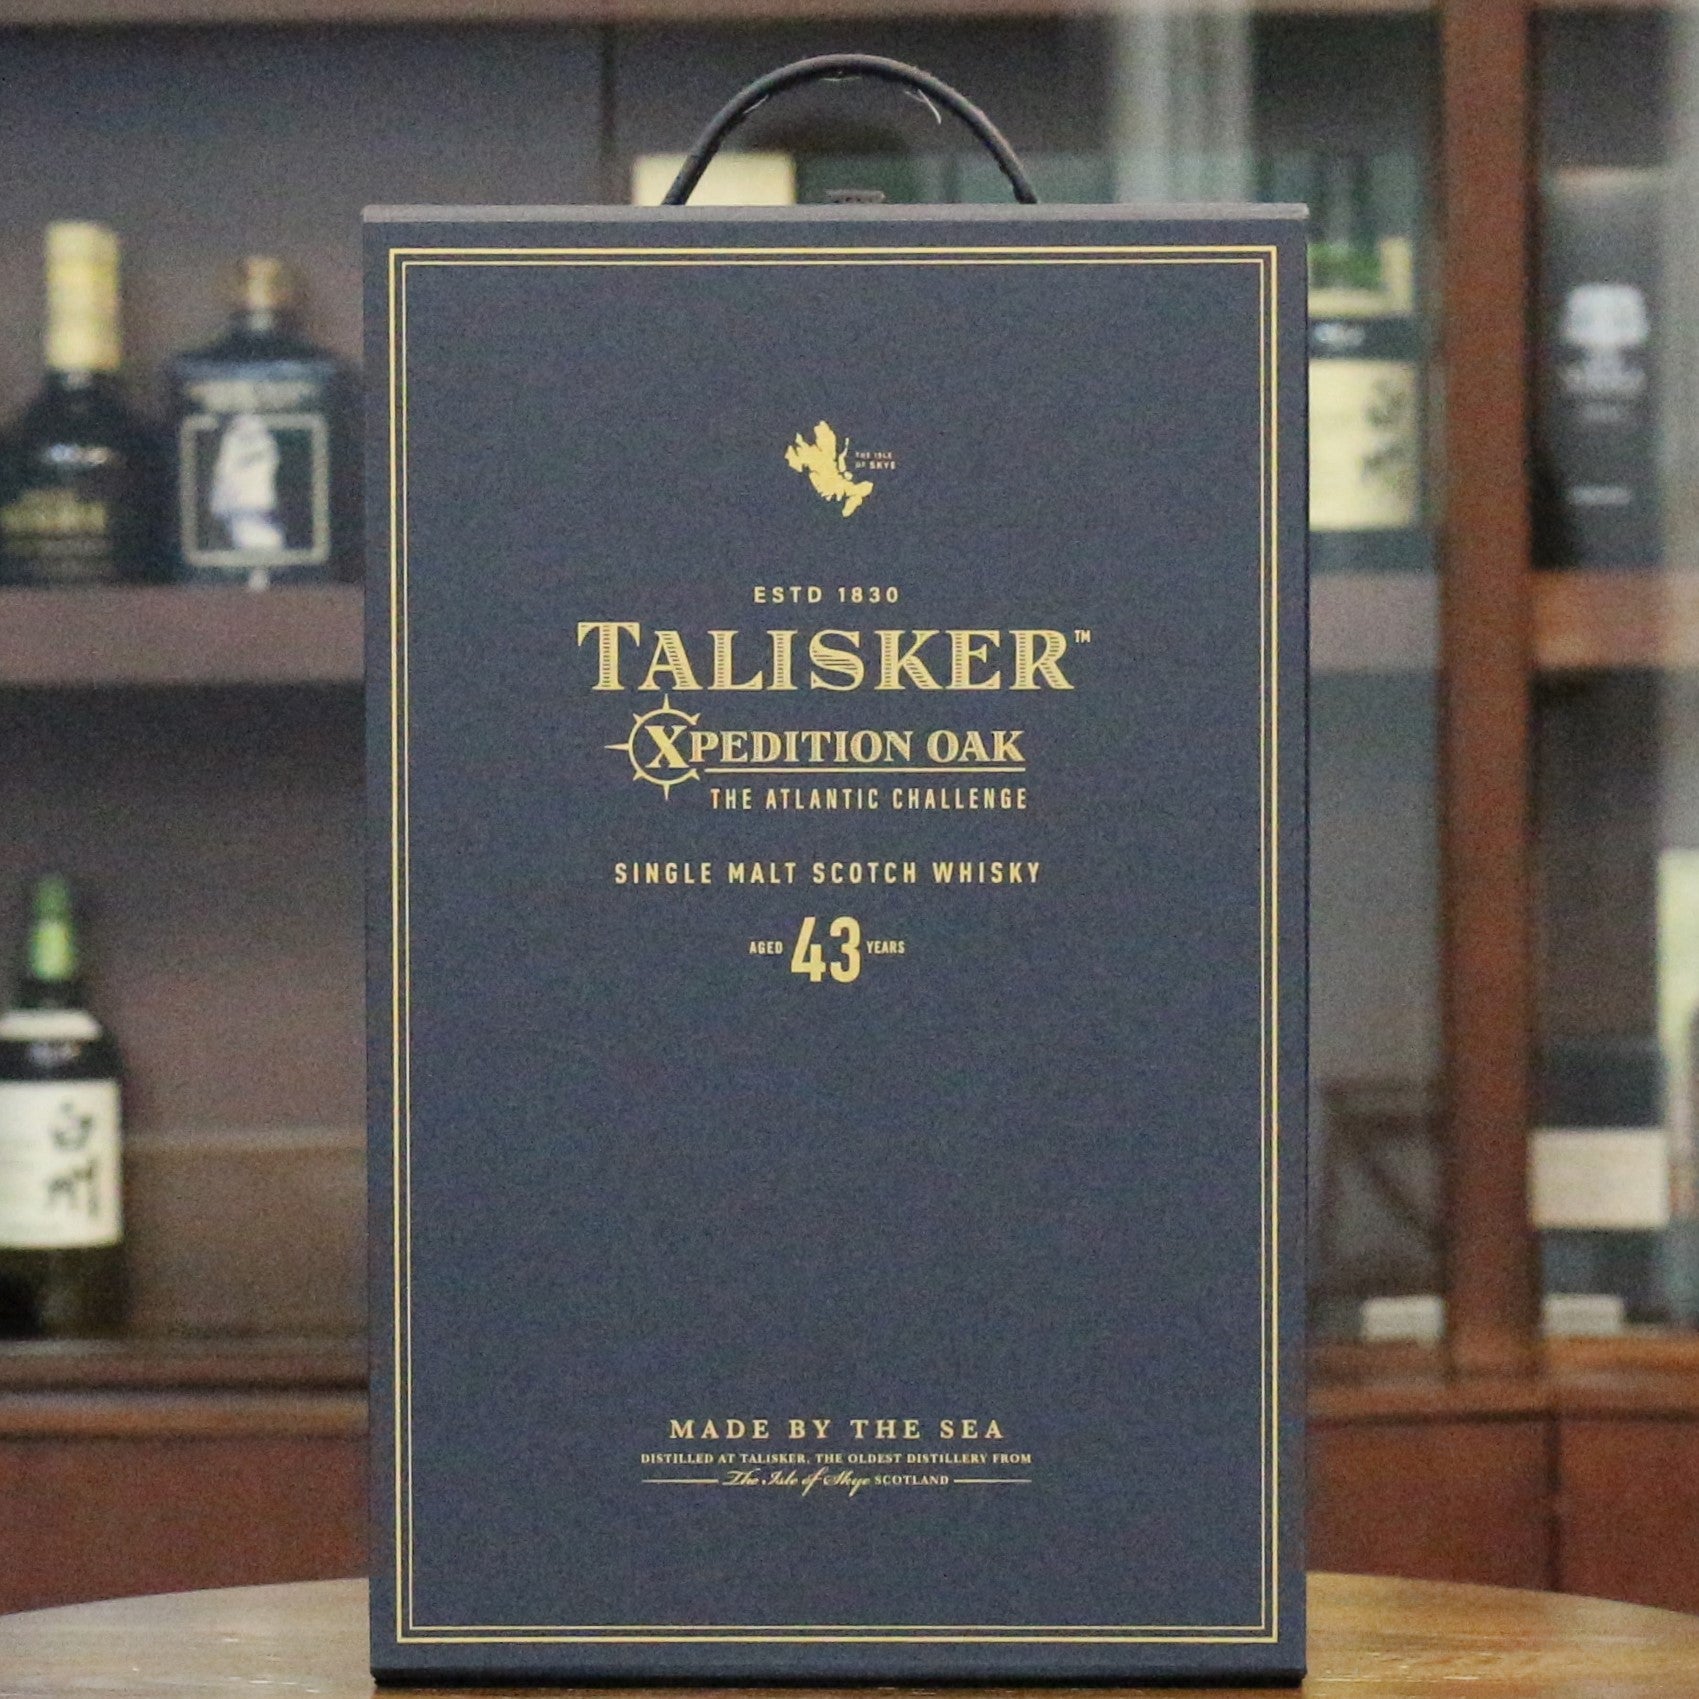 Talisker special release | Talisker collection | Whisky collector | Vintage Whisky | Rare Whisky